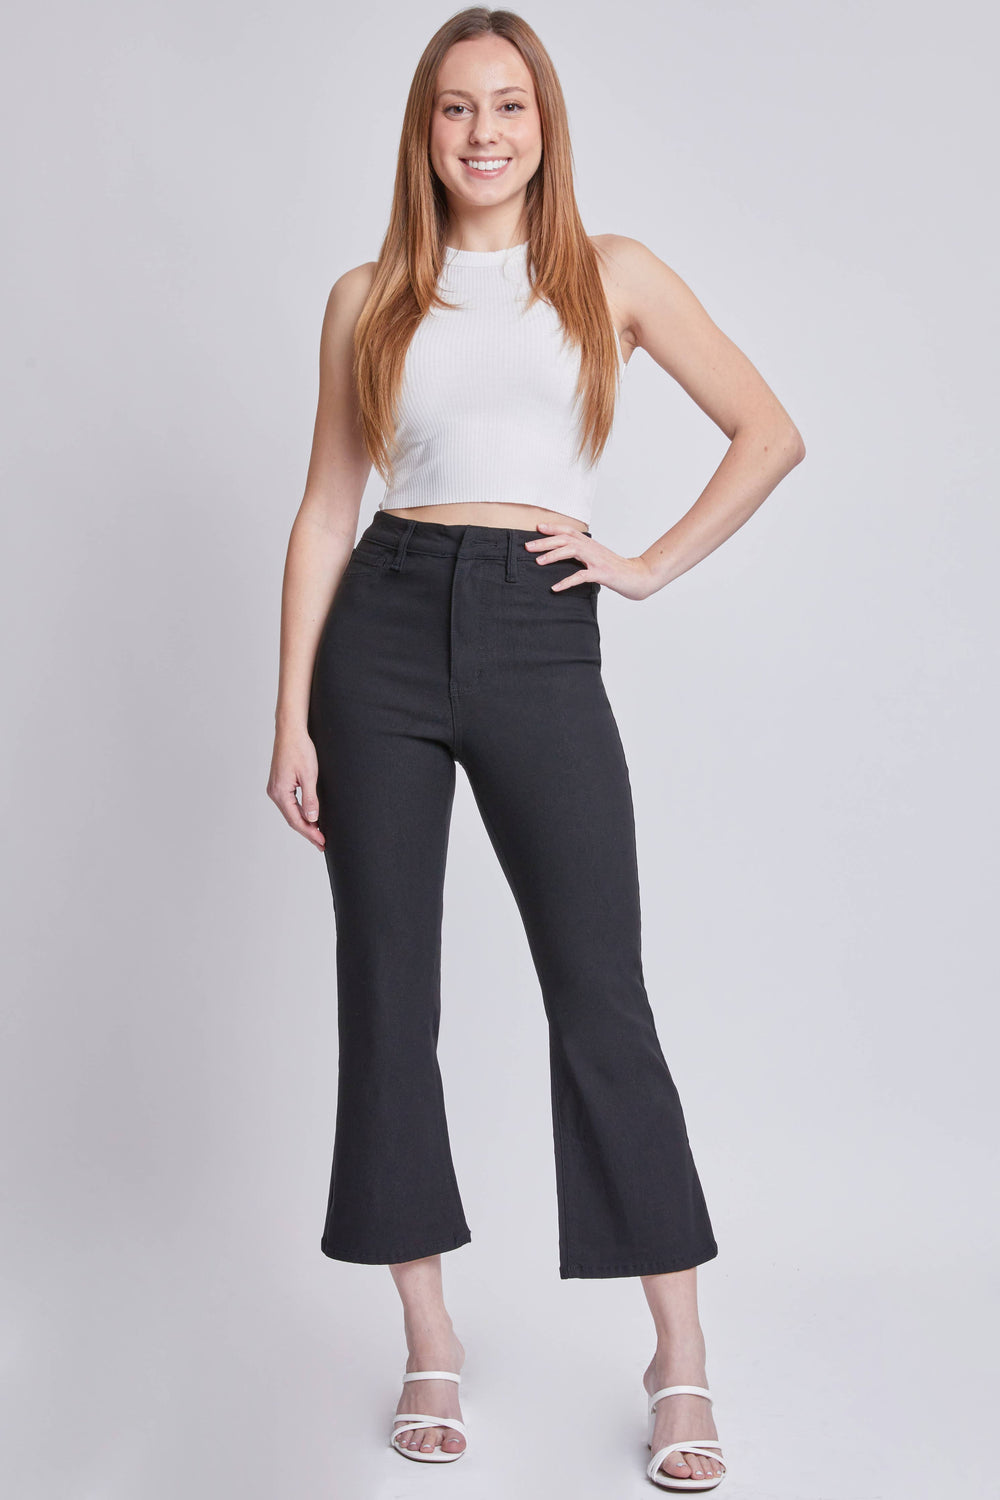 YMI Hyperstretch Cropped Kick Flare Pants, Black-Pants-Inspired by Justeen-Women's Clothing Boutique in Chicago, Illinois